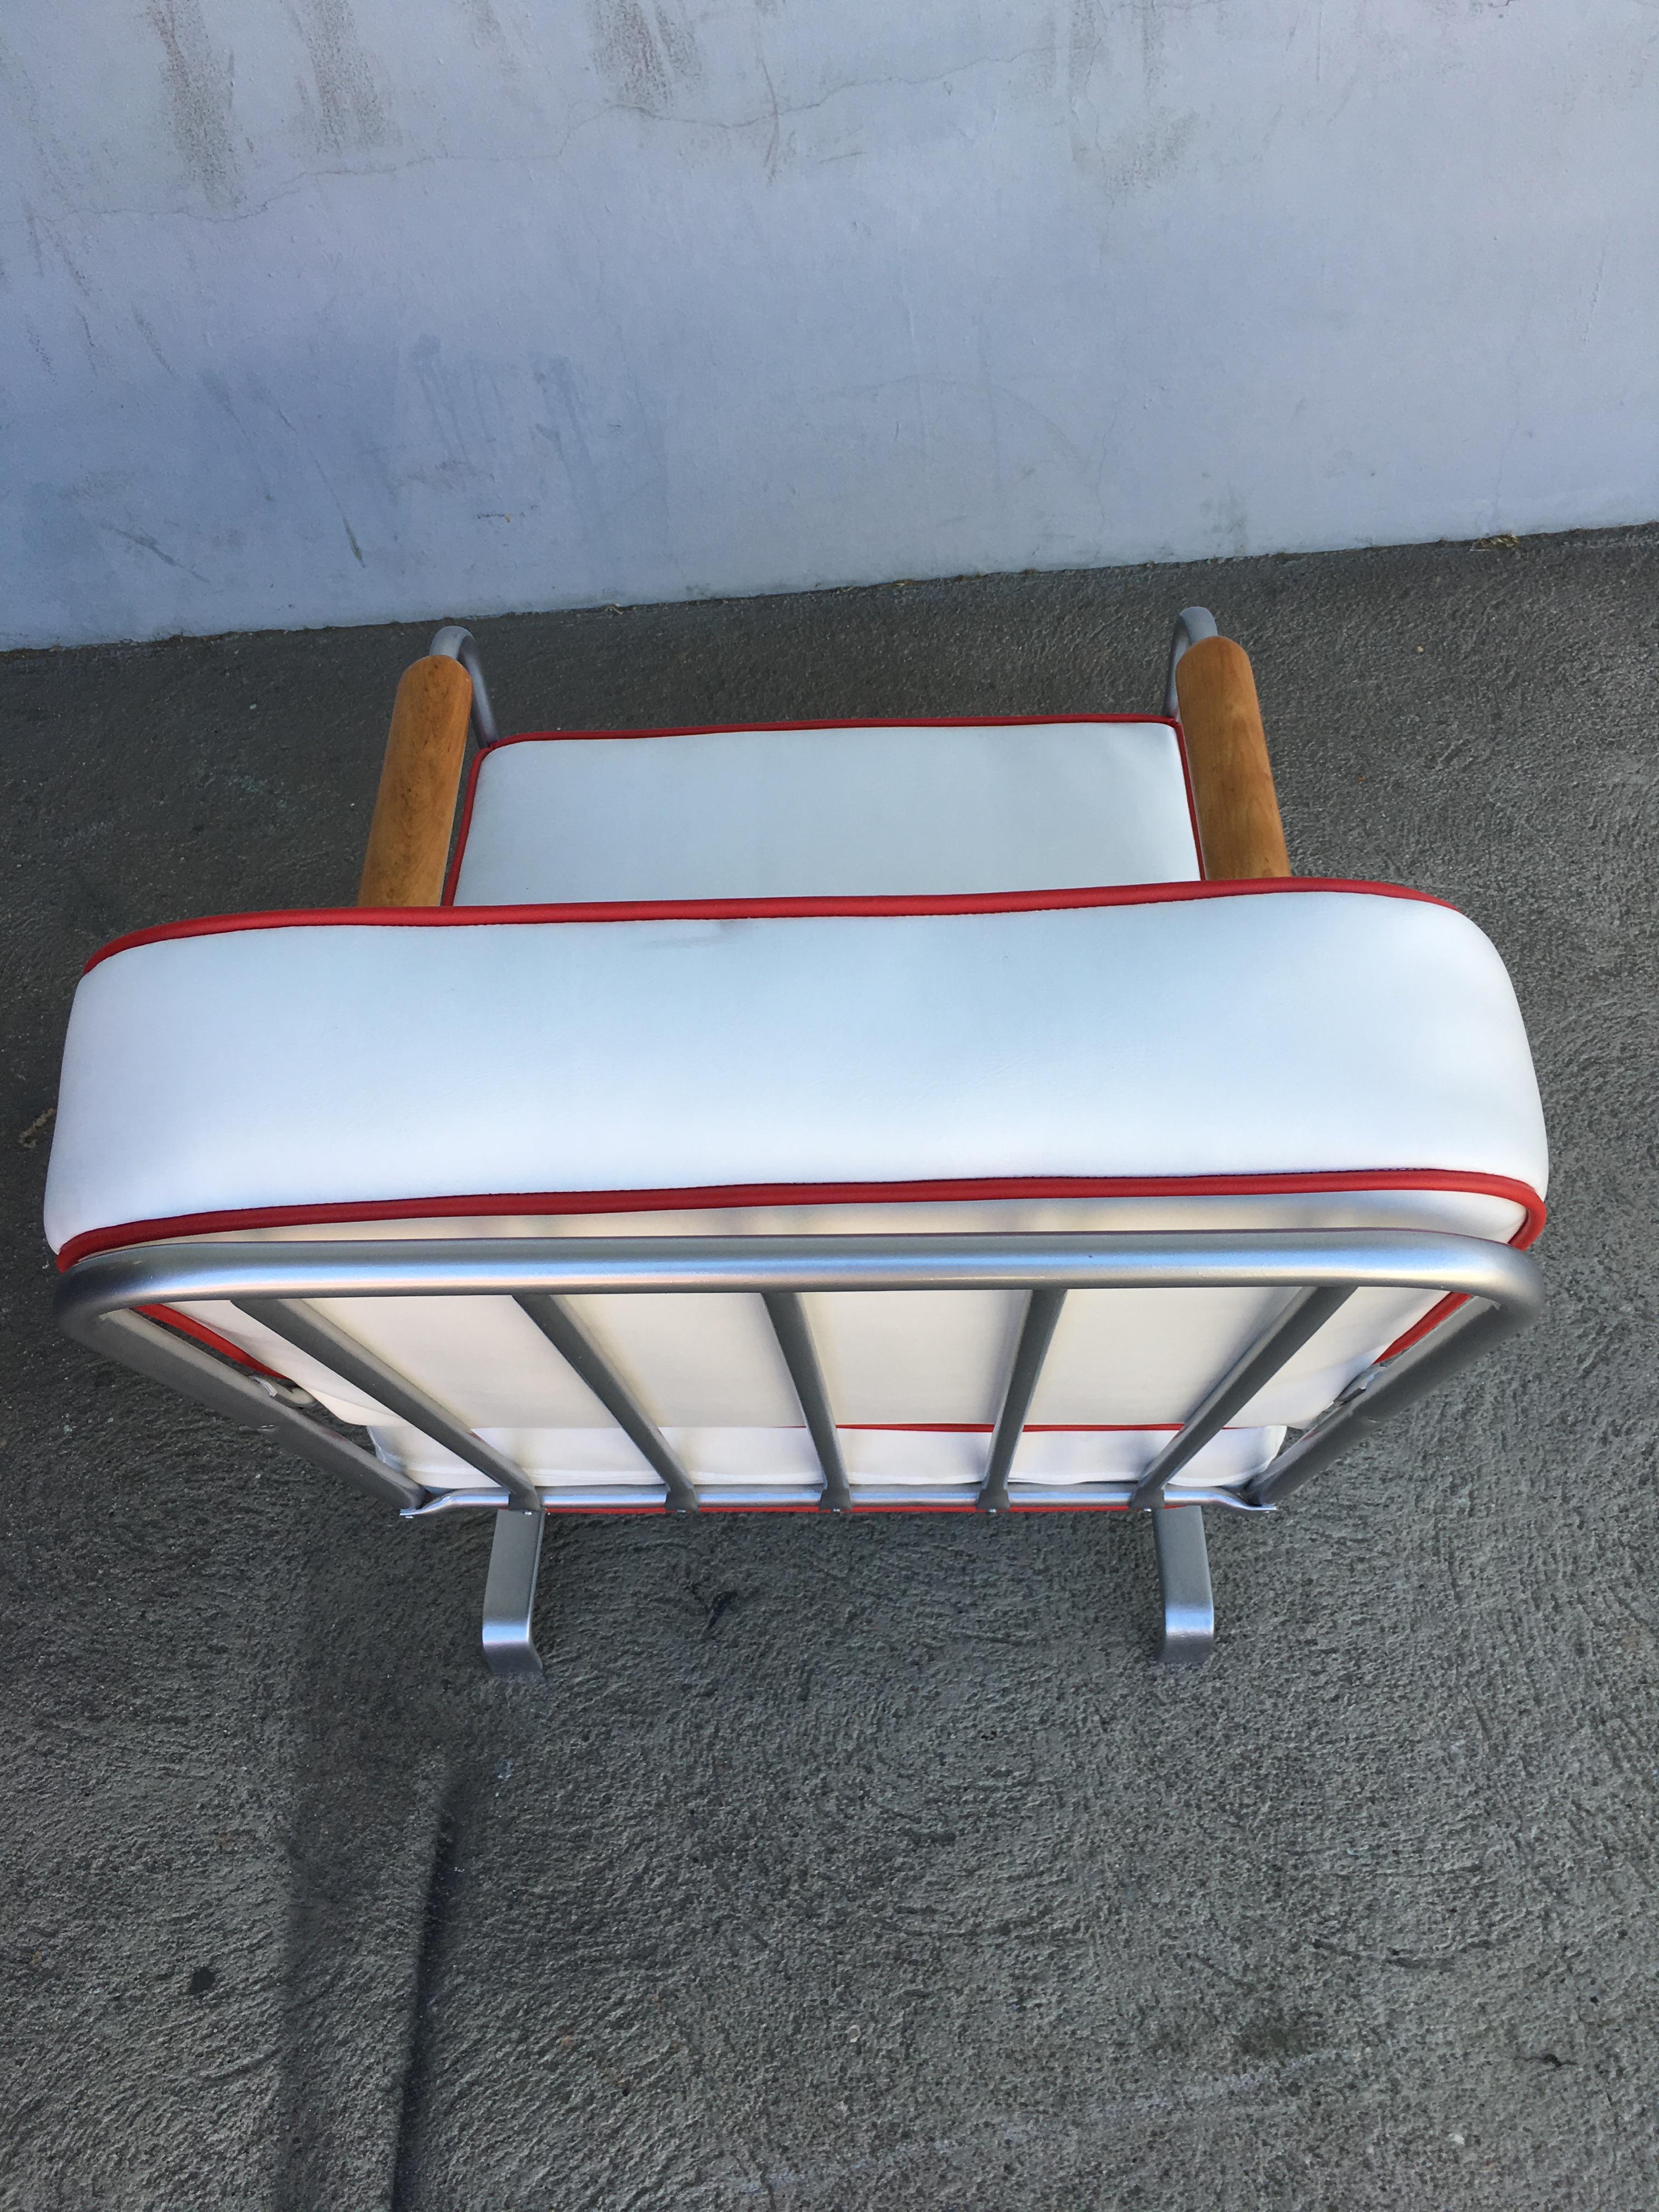 Chrome Art Deco Springer Rocking Chair In Excellent Condition For Sale In Van Nuys, CA